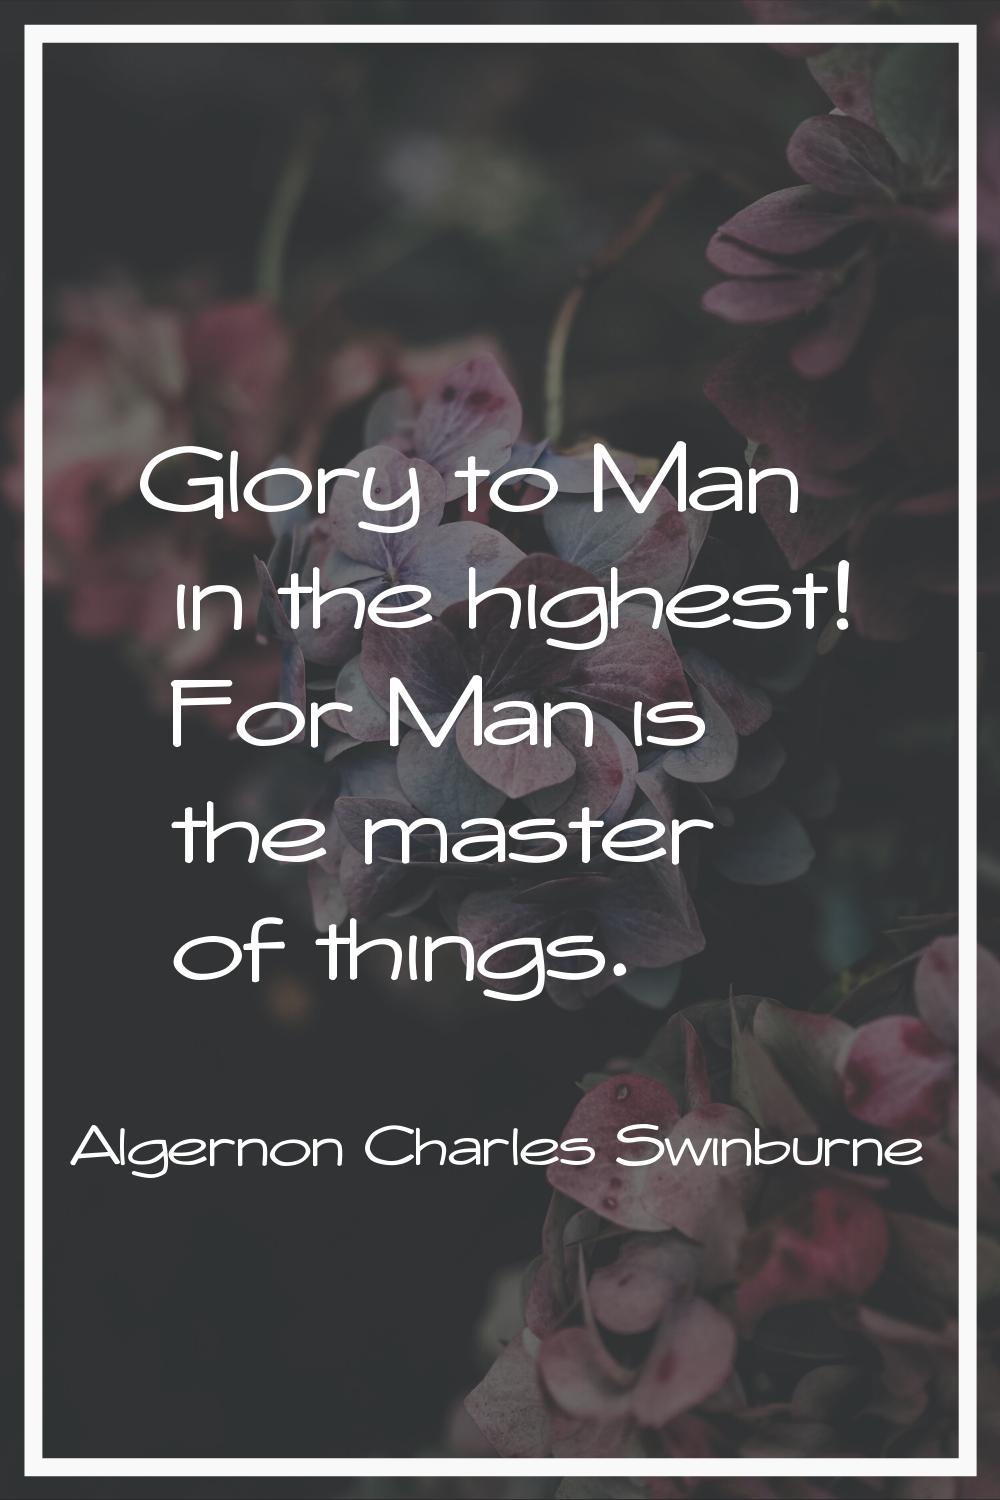 Glory to Man in the highest! For Man is the master of things.